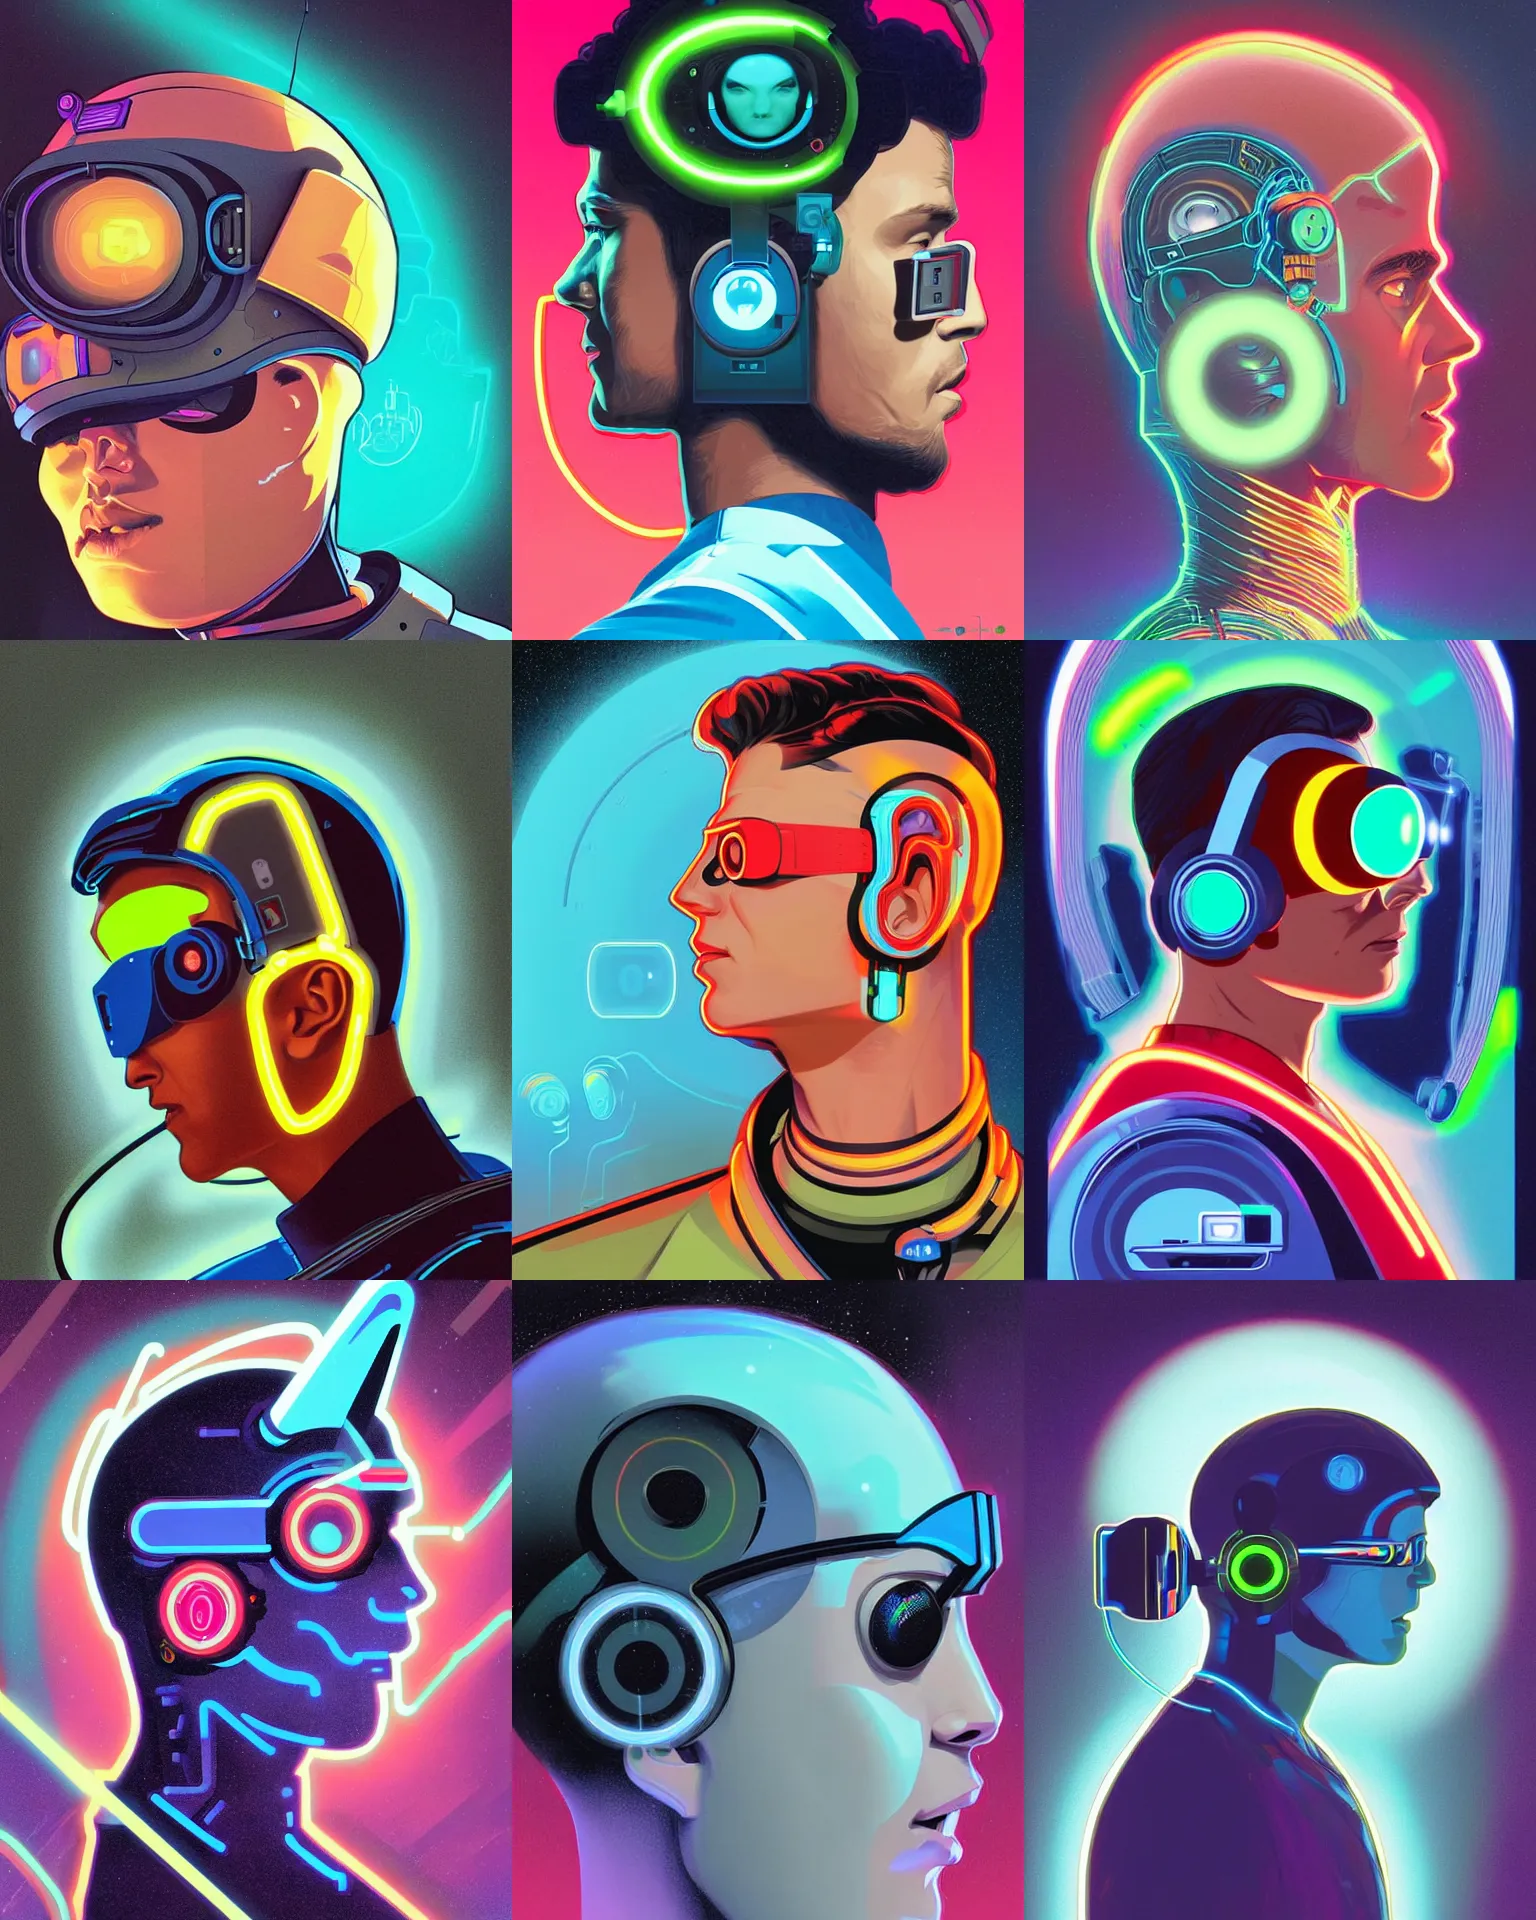 Prompt: side view future coder man, sleek cyclops display over eyes and glowing headset, neon accents, holographic colors, desaturated headshot portrait digital painting by tom whalen, alex grey, alphonse mucha, donoto giancola, dean cornwall, rhads, john berkey, astronaut cyberpunk electric lights profile